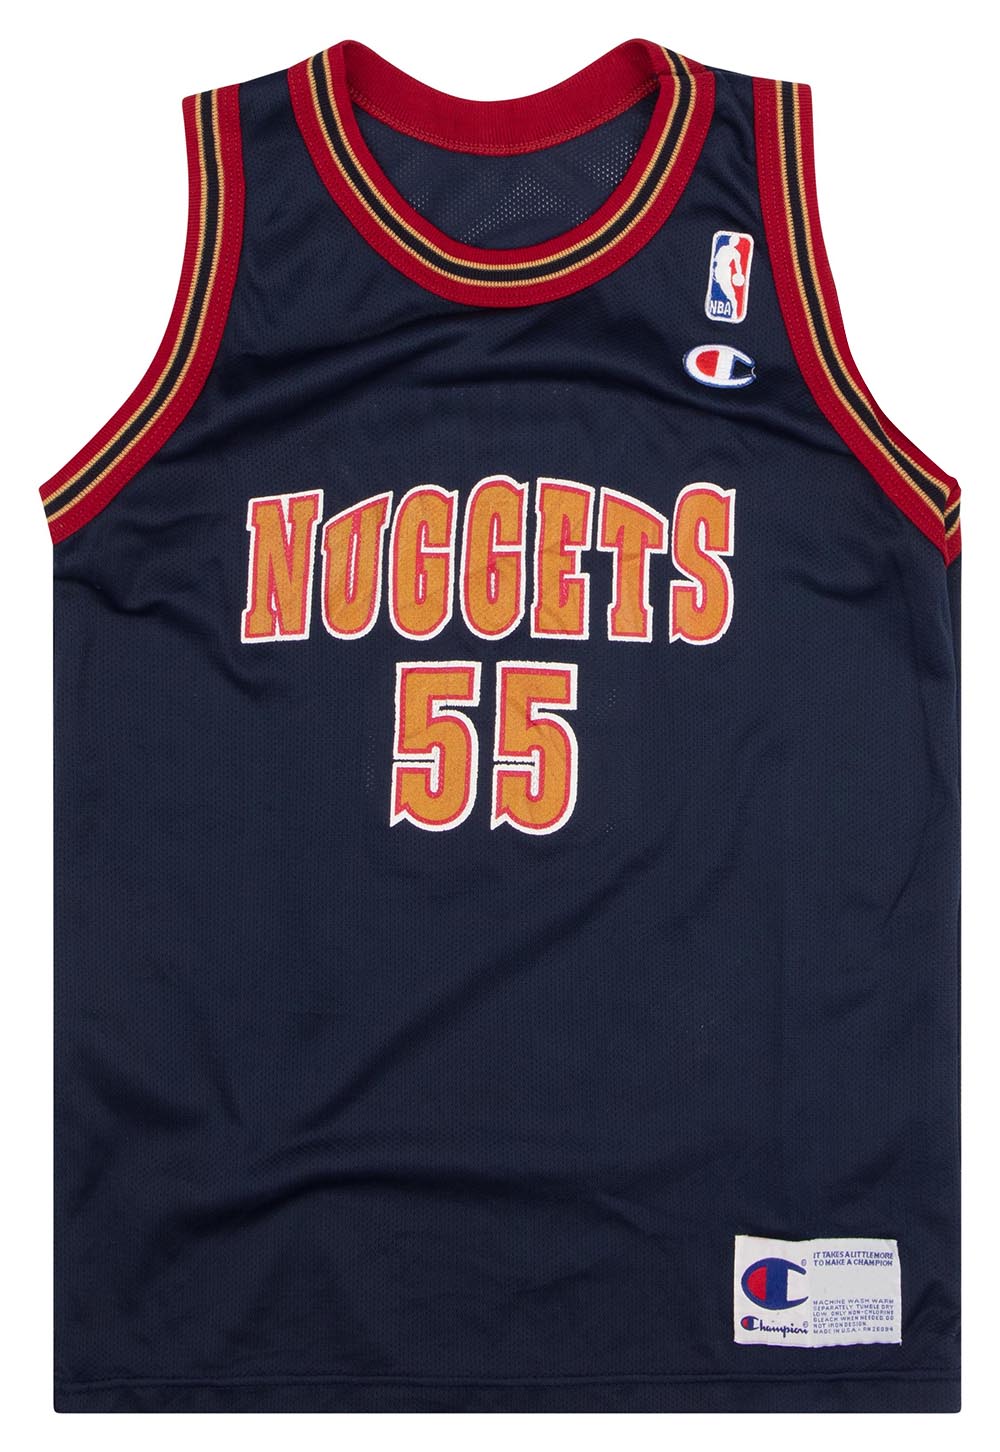 1995-96 DENVER NUGGETS MUTOMBO #55 CHAMPION JERSEY (AWAY) Y